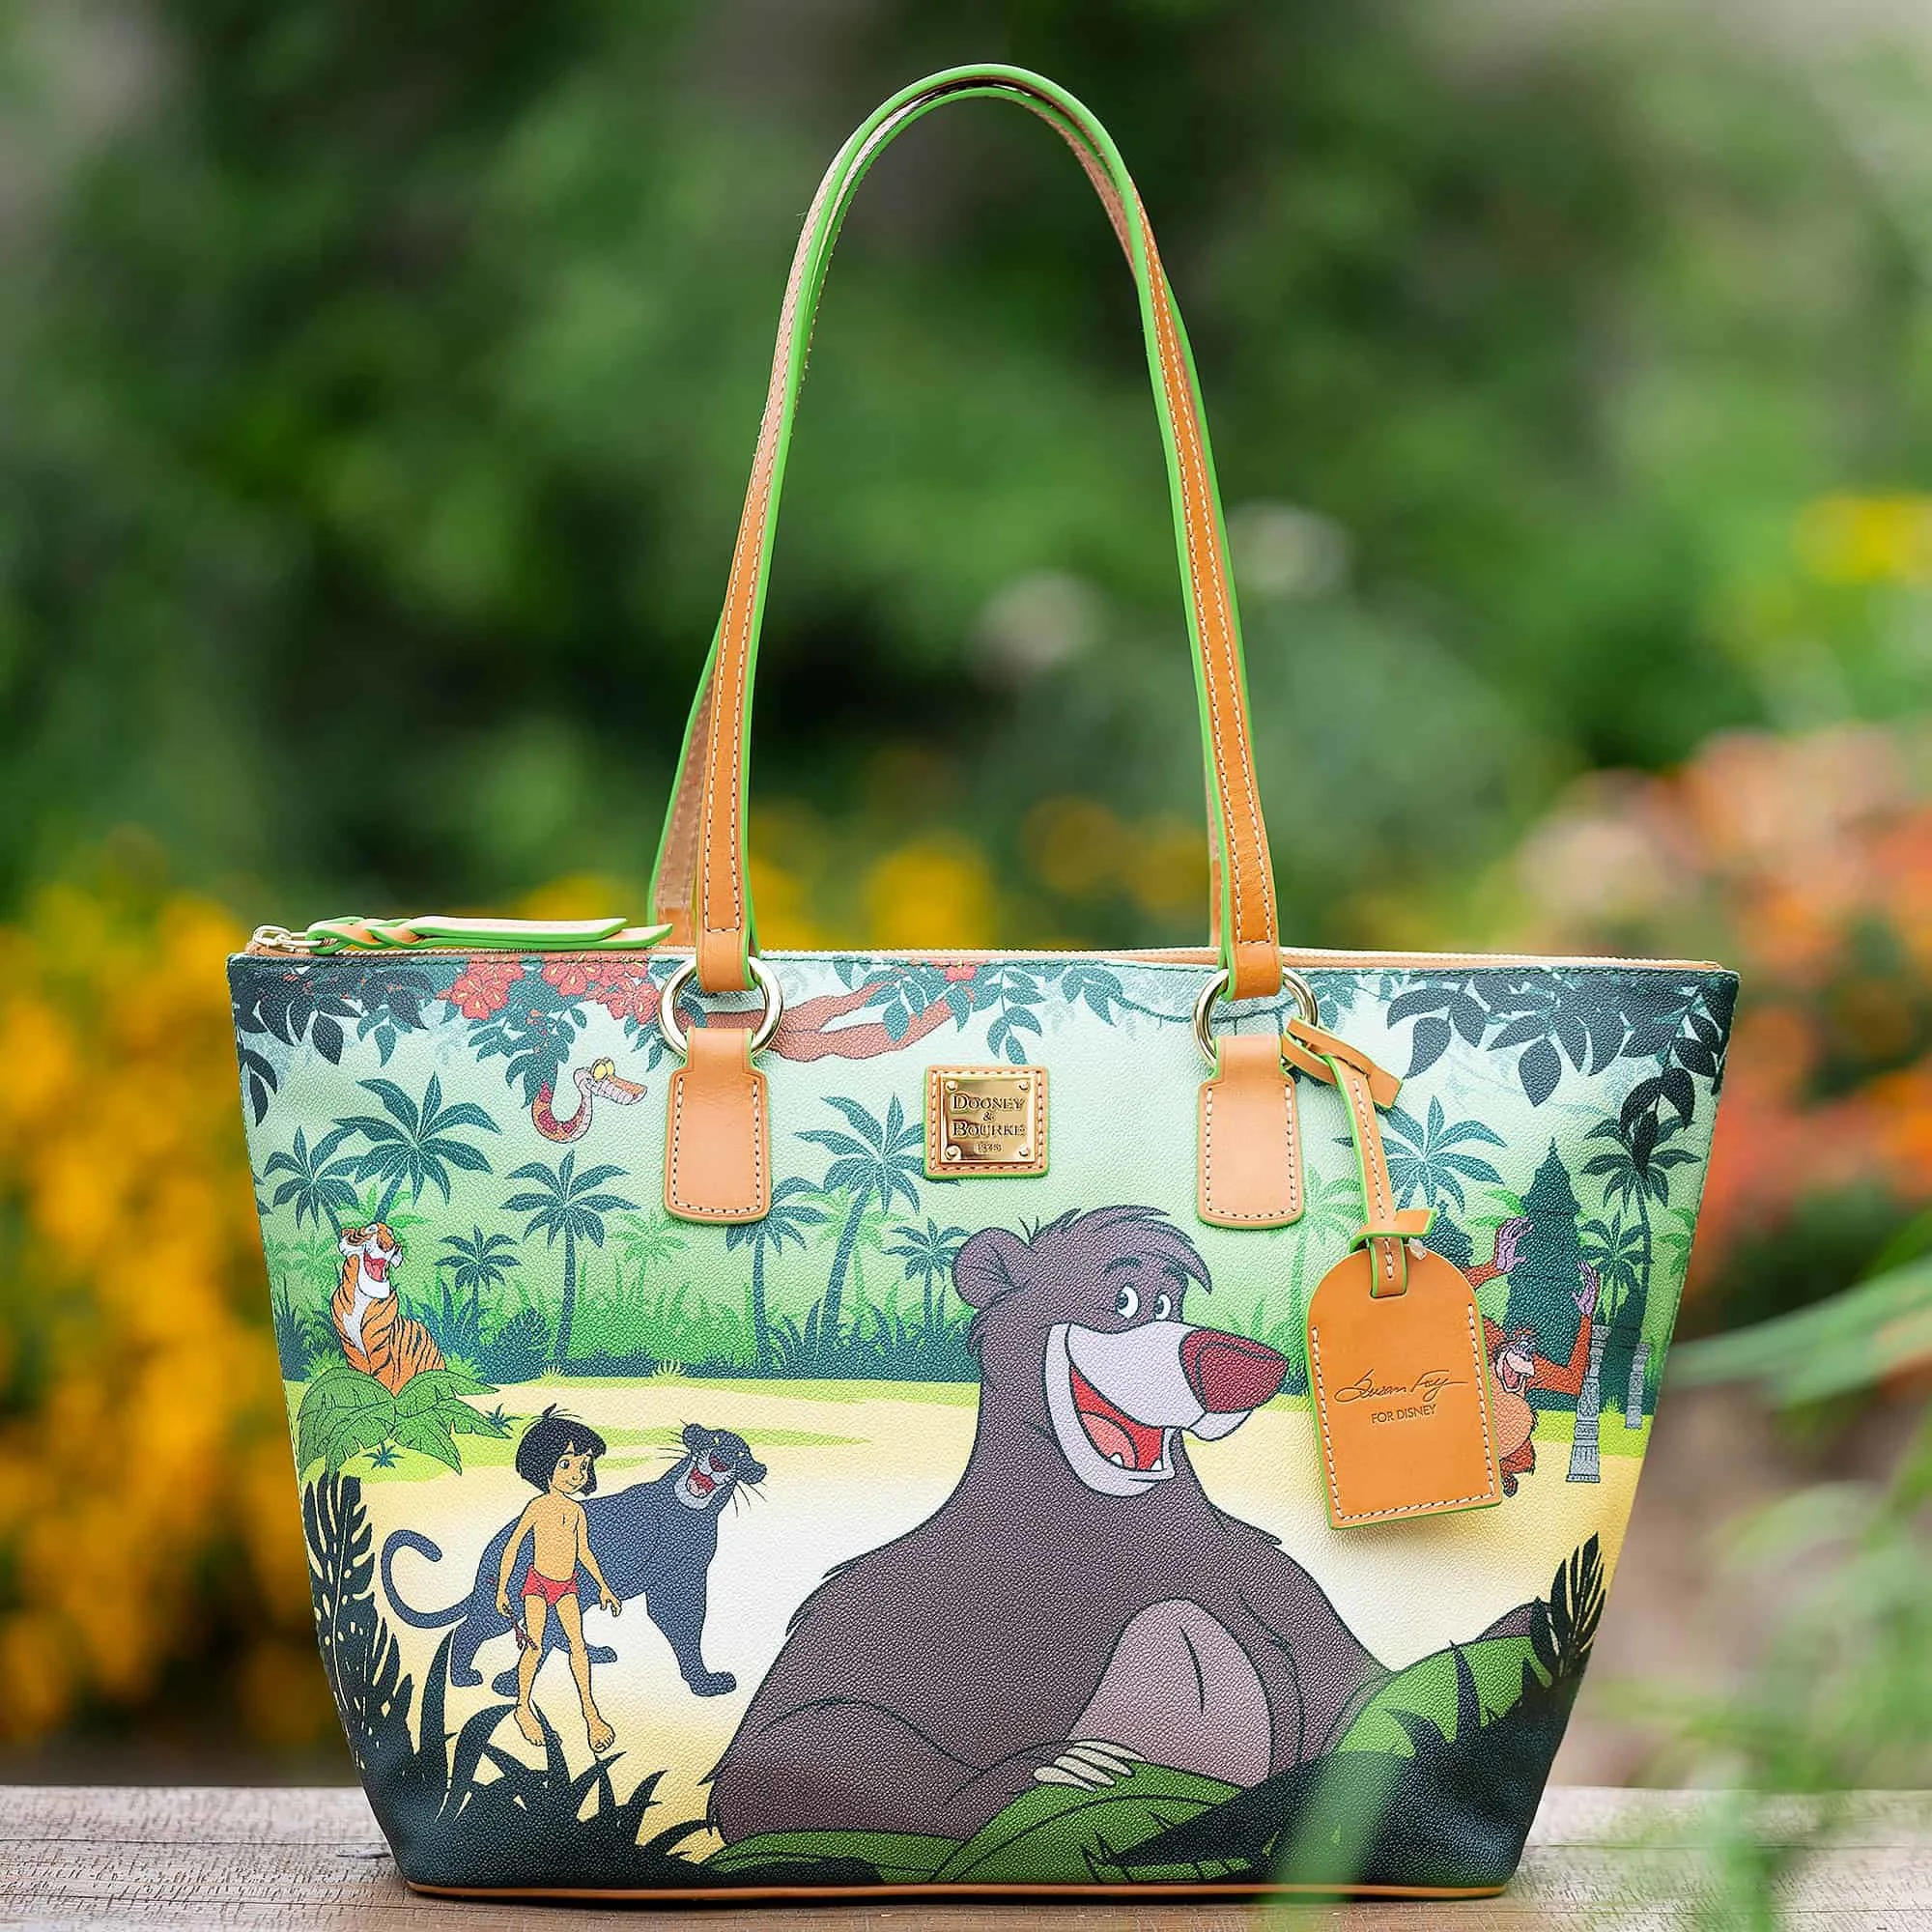 The Jungle Book Tote by Disney Dooney & Bourke